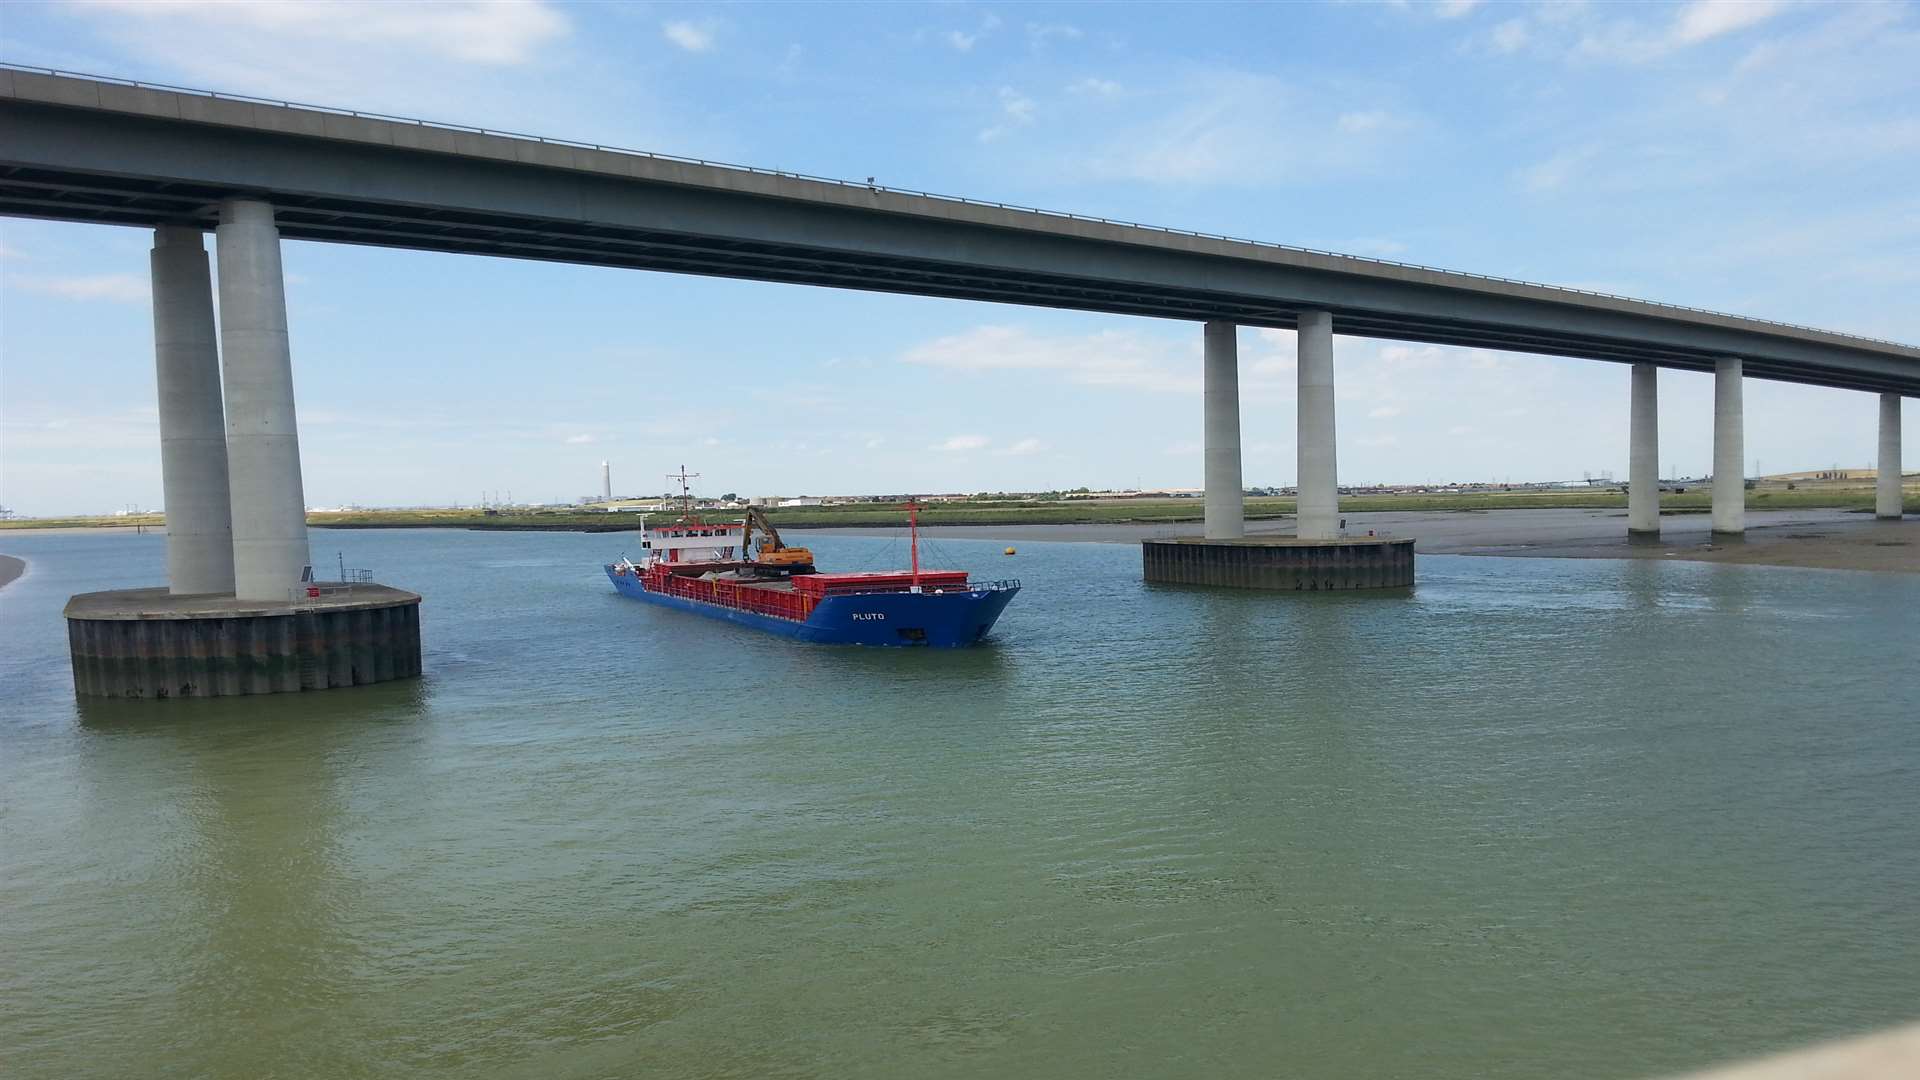 The Pluto sails under the Sheppey Crossing